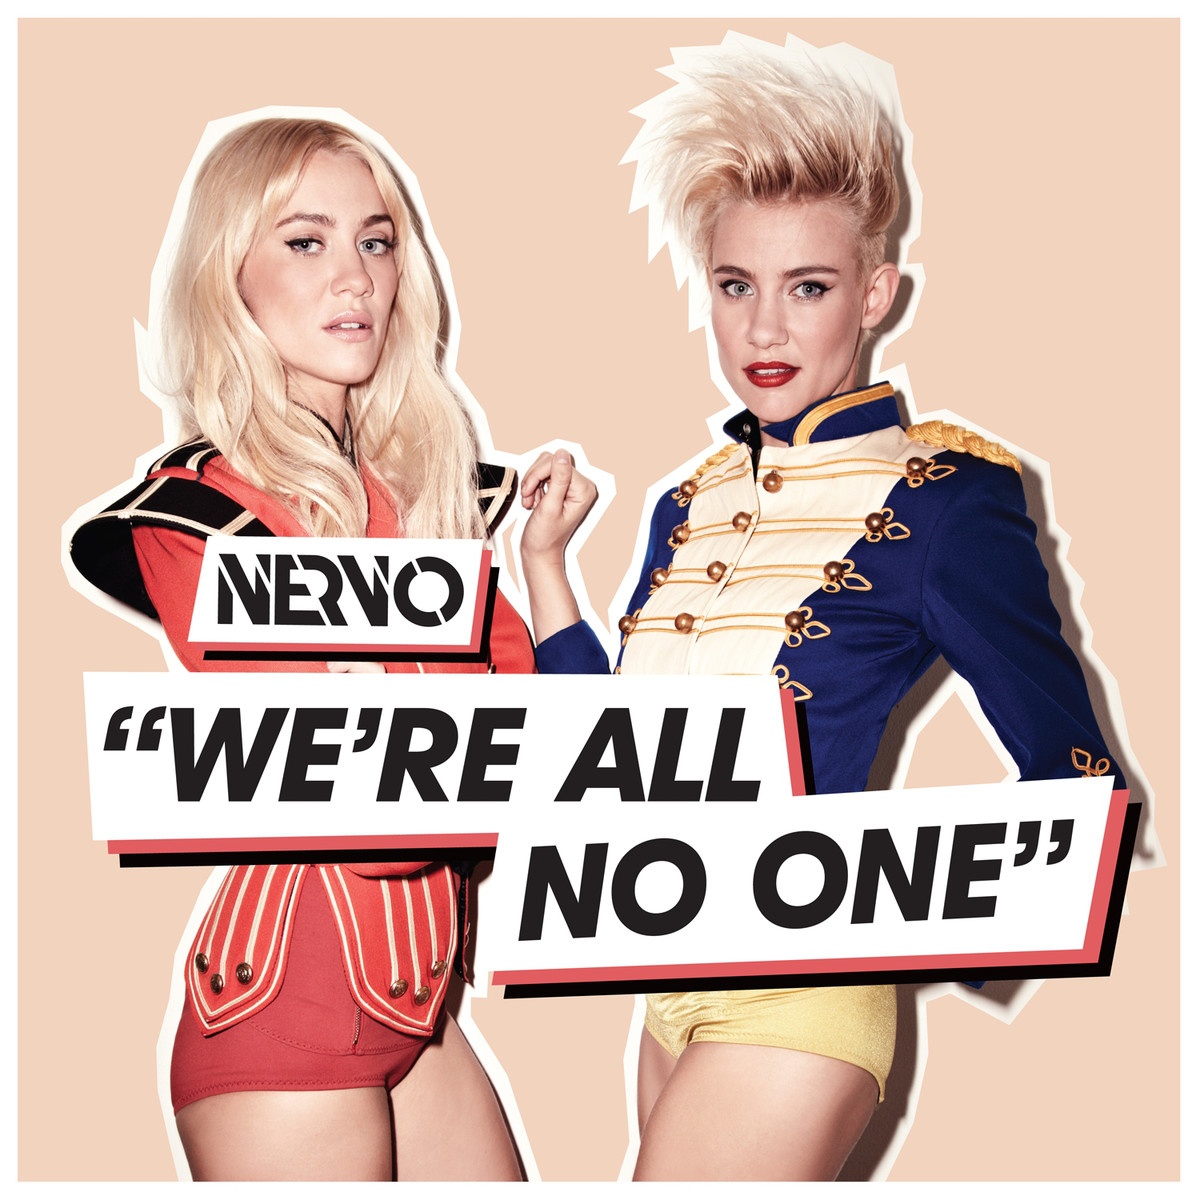 We're All No One (Nervo Goes To Paris Remix Teaser)